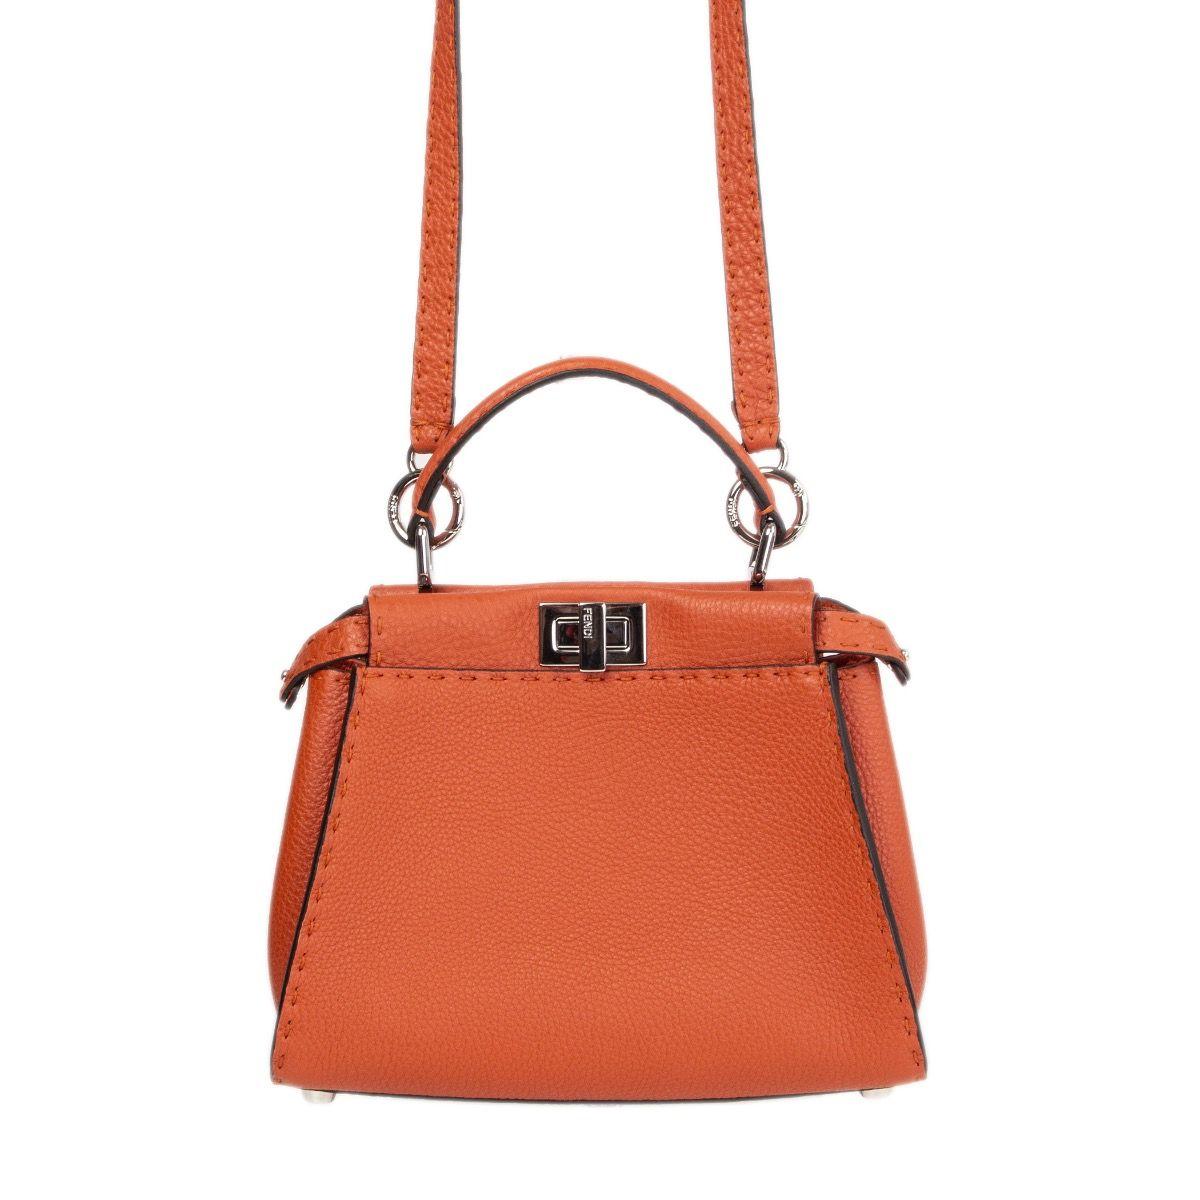 Fendi 'Peekaboo Mini' shoulder bag in burnt orange textured calfskin. Opens with a tdouble urn lock on top and is lined in burnt orange calfskin and brown microfibre with one zipper pocket and a credid card slot. Has been carried once and is in